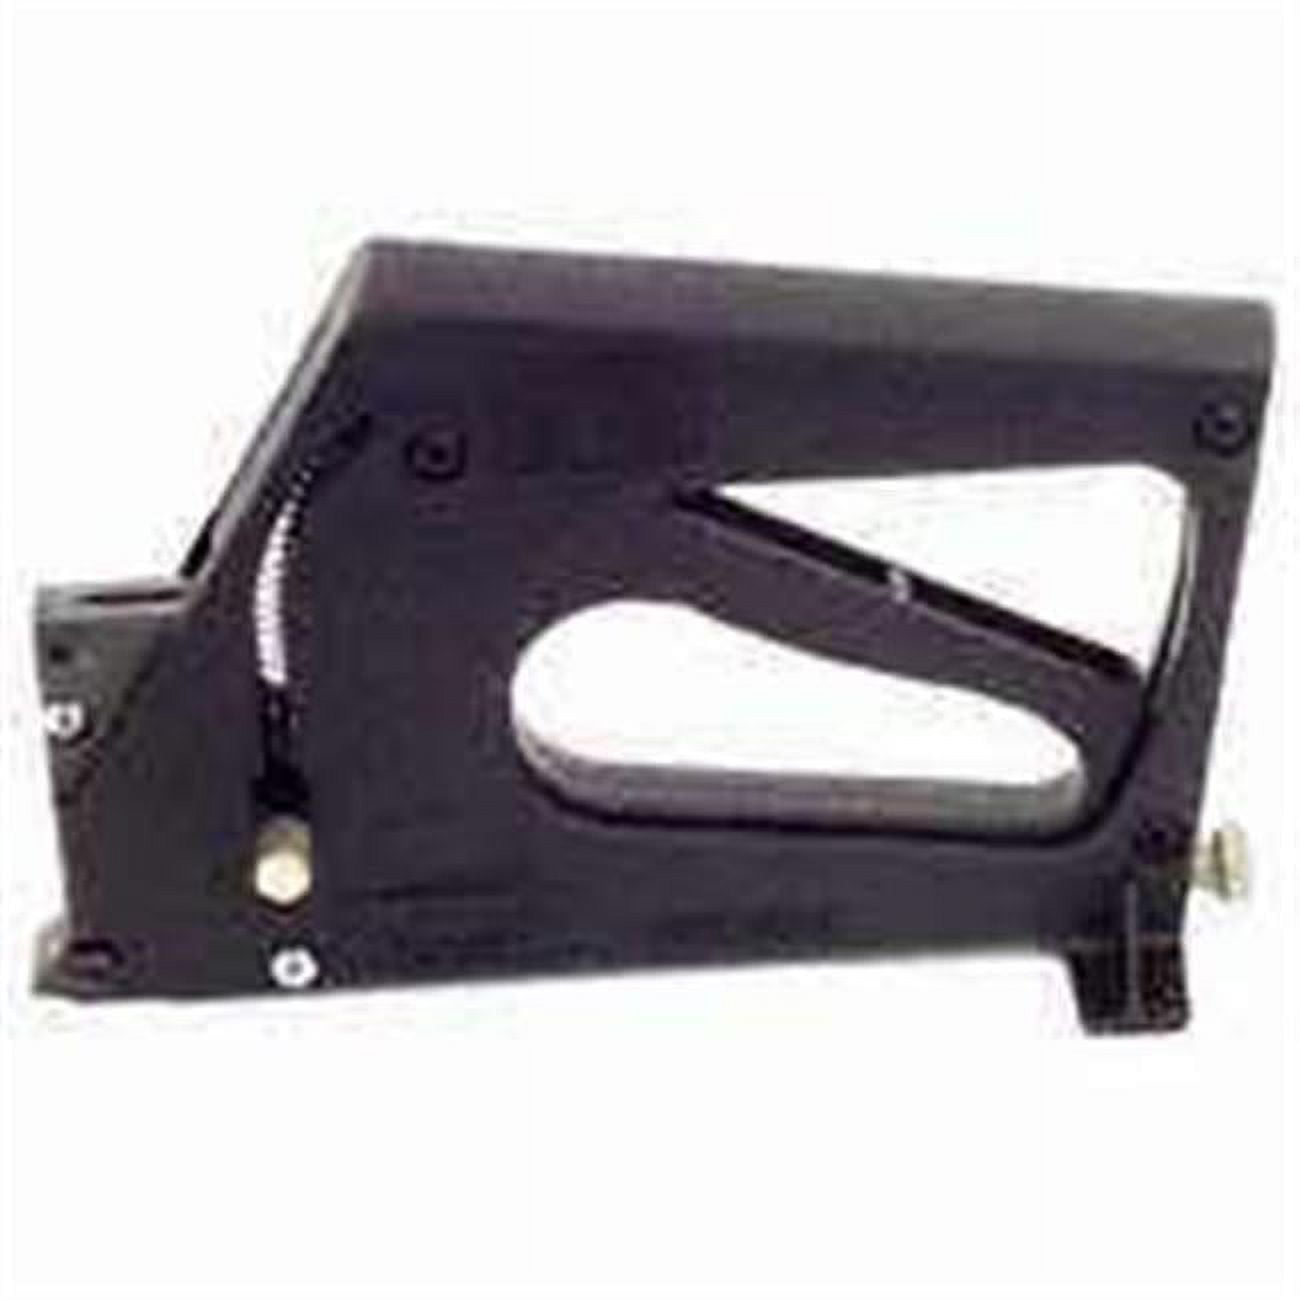 Fletcher-Terry FrameMaster Picture Framing Point Driver